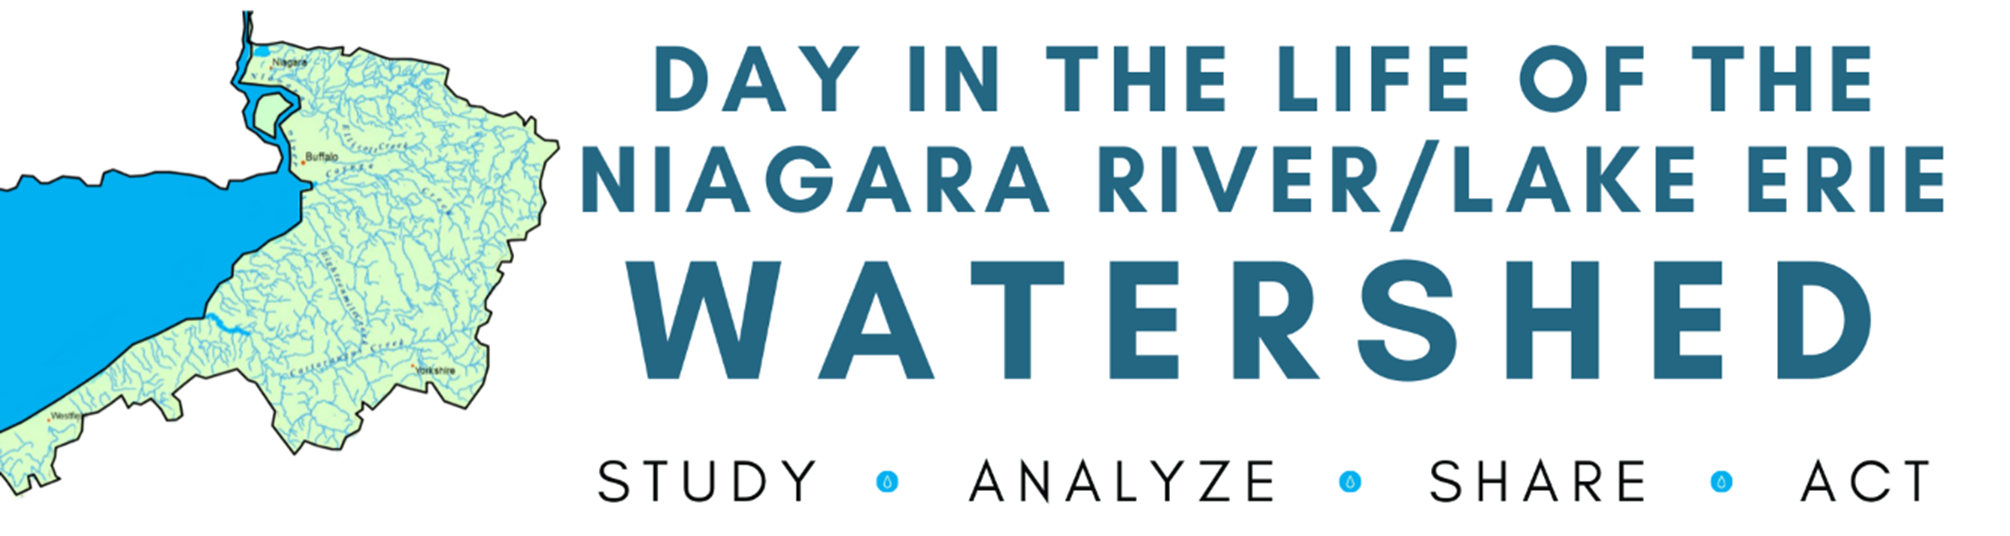 Day in the Life of the Niagara River/Lake Erie Watershed - Reinstein ...